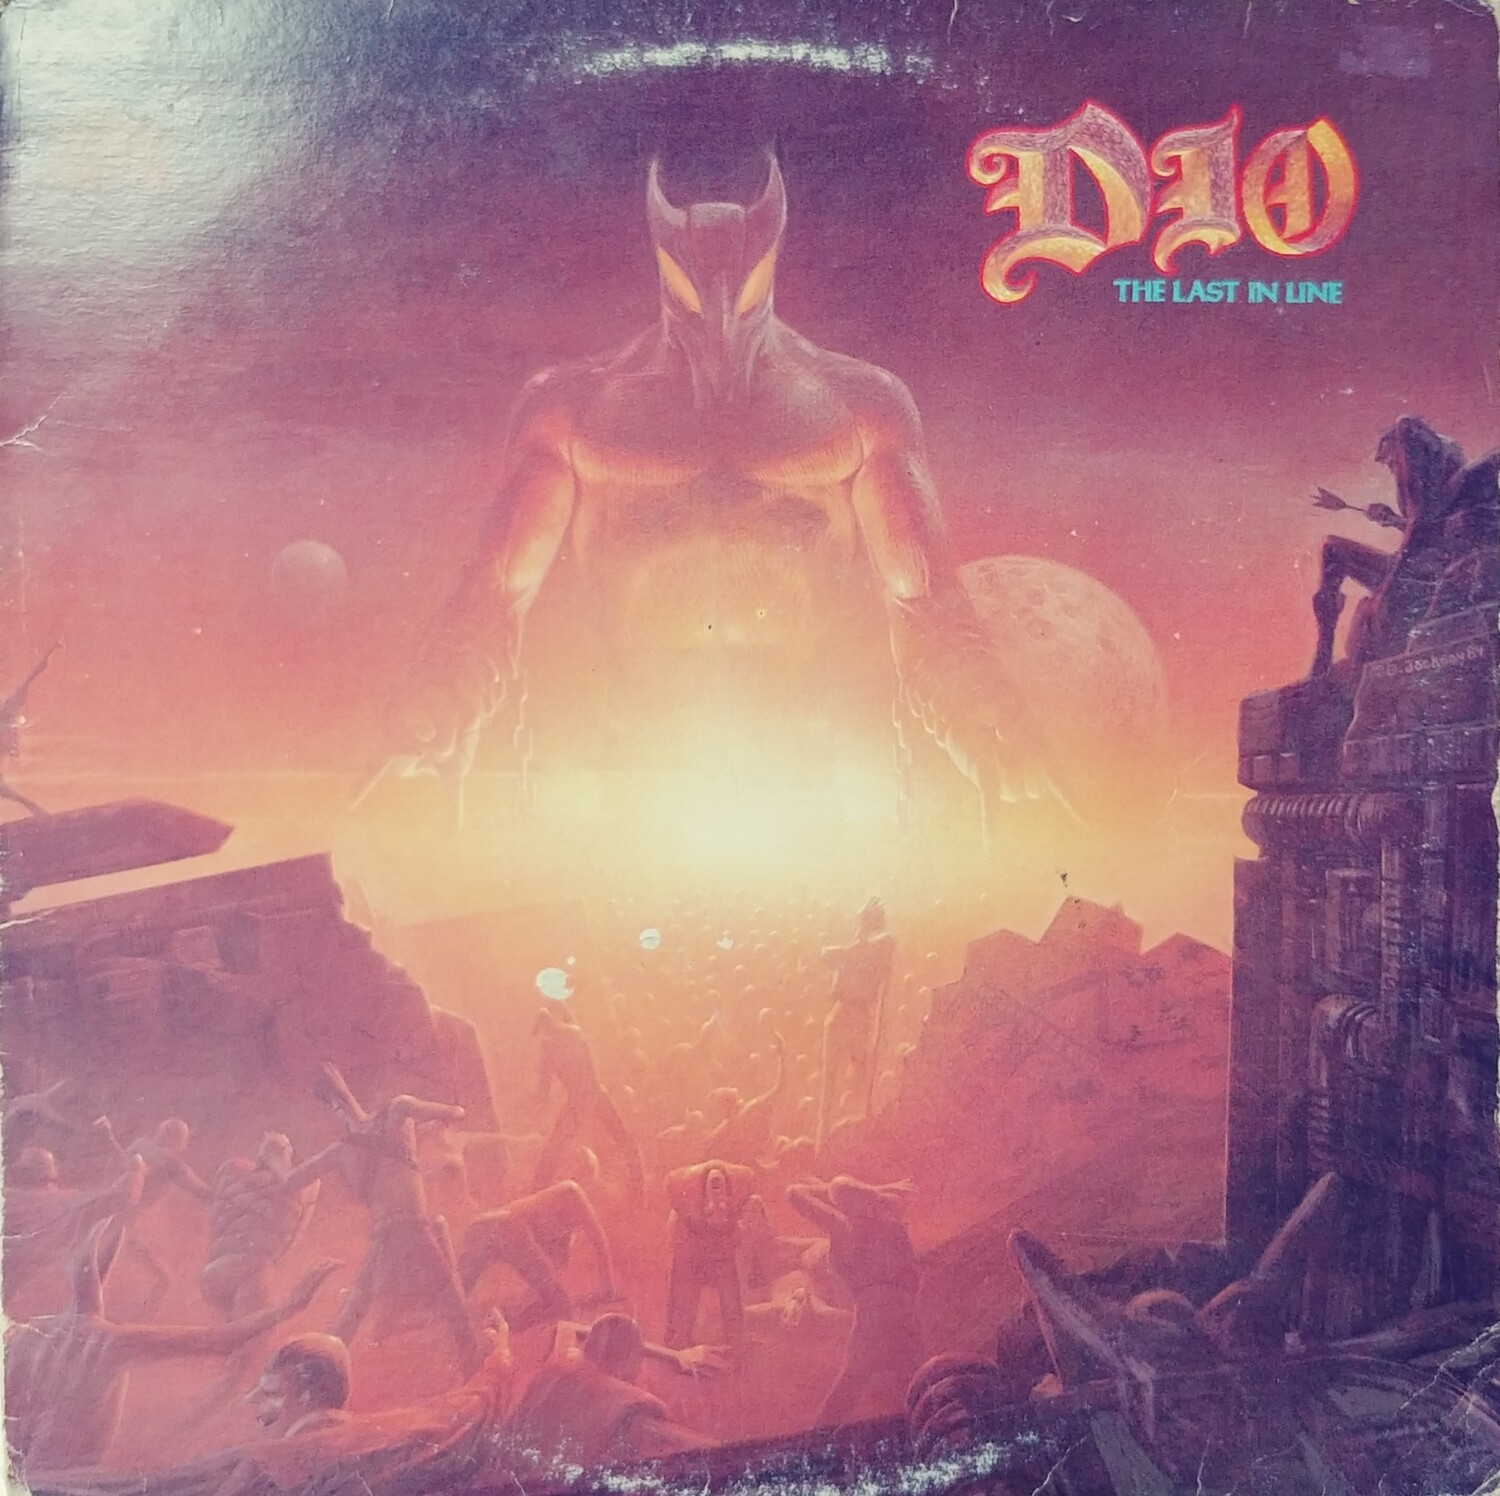 Dio - The Last in line